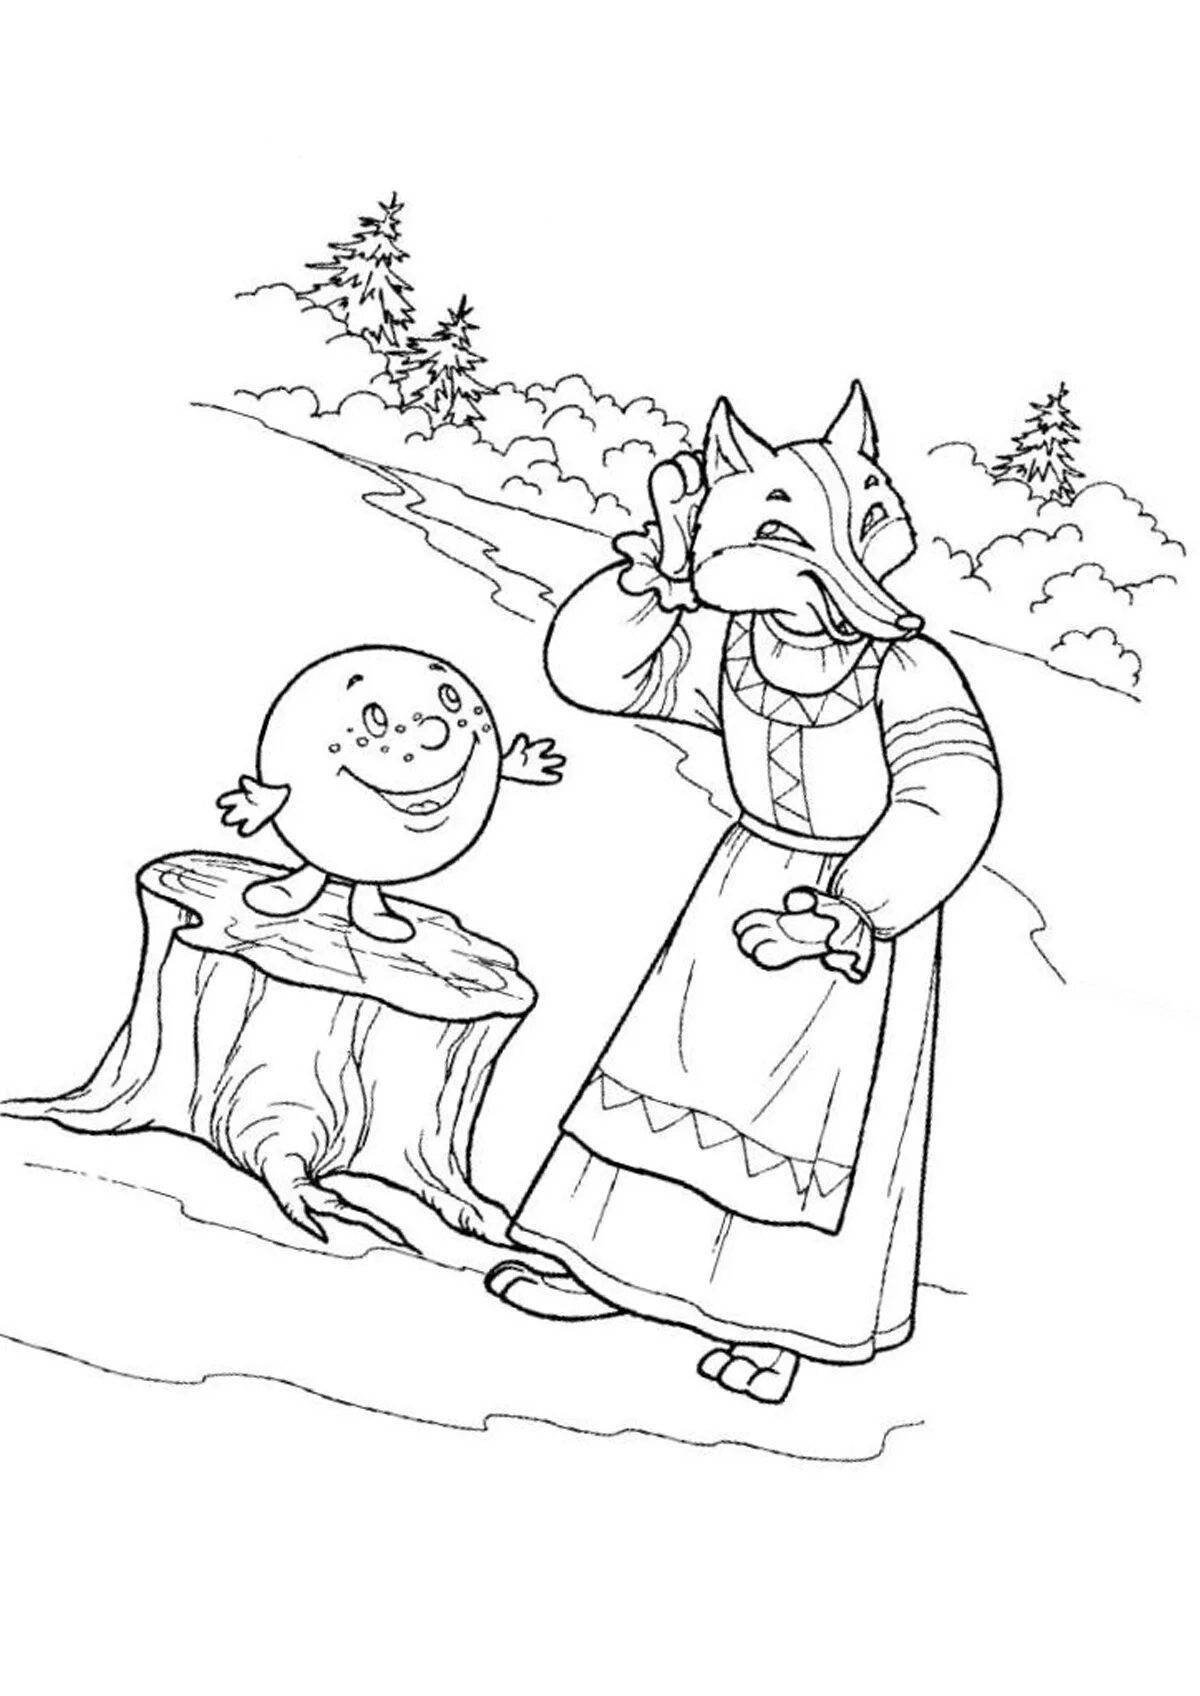 Snow Maiden and Fox #1